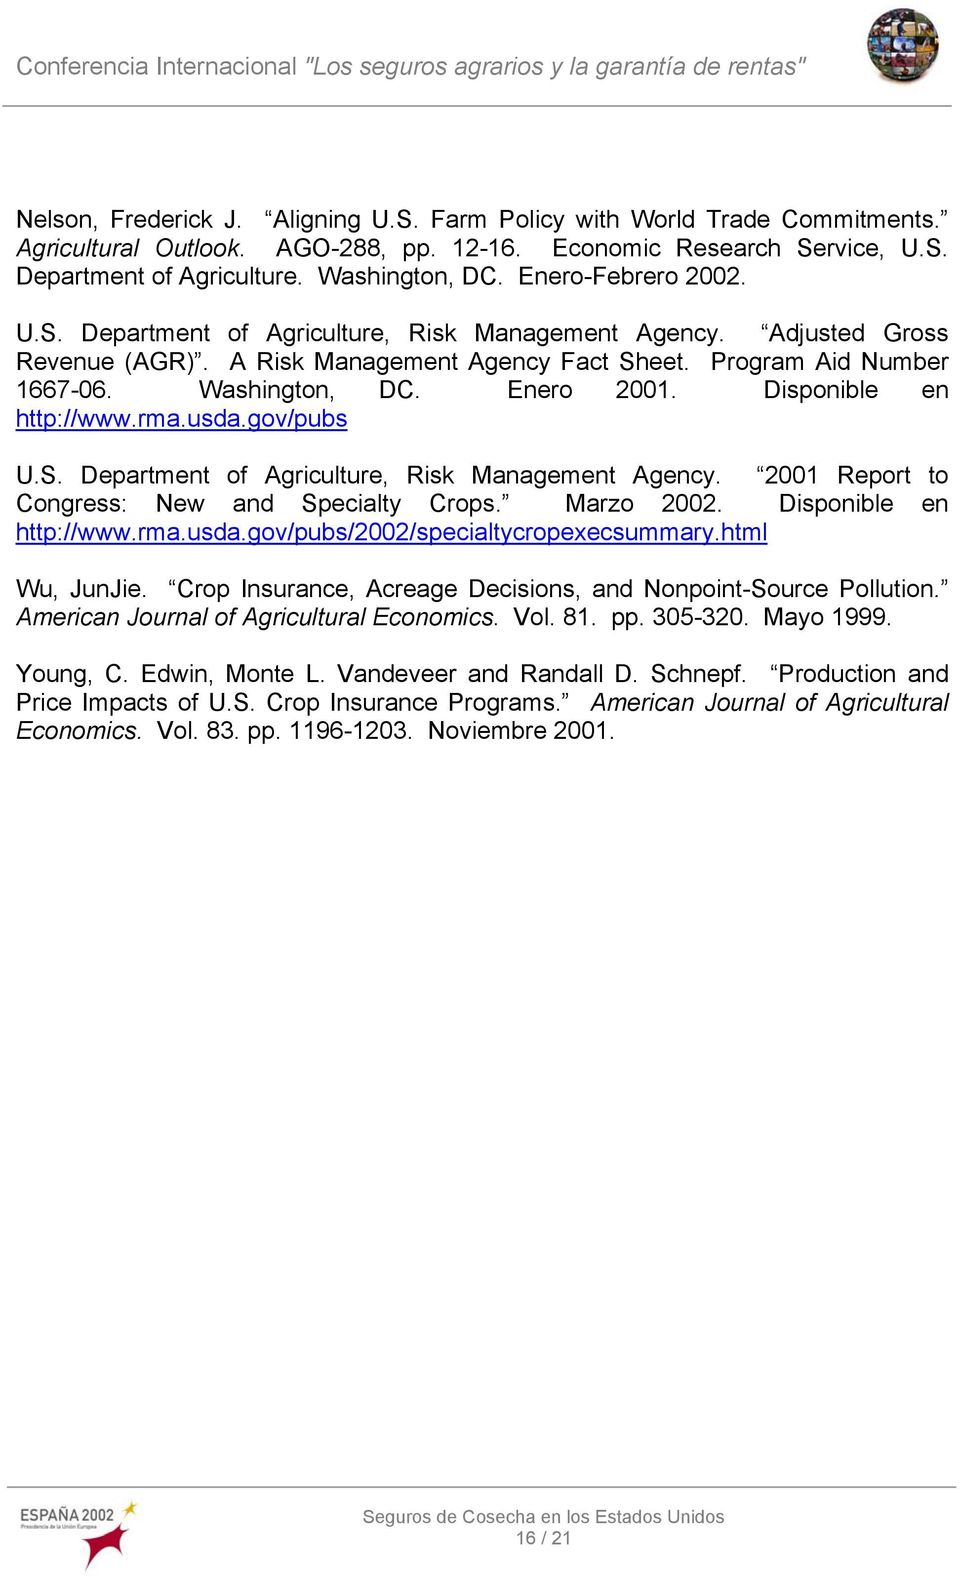 Disponible en http://www.rma.usda.gov/pubs U.S. Department of Agriculture, Risk Management Agency. 2001 Report to Congress: New and Specialty Crops. Marzo 2002. Disponible en http://www.rma.usda.gov/pubs/2002/specialtycropexecsummary.